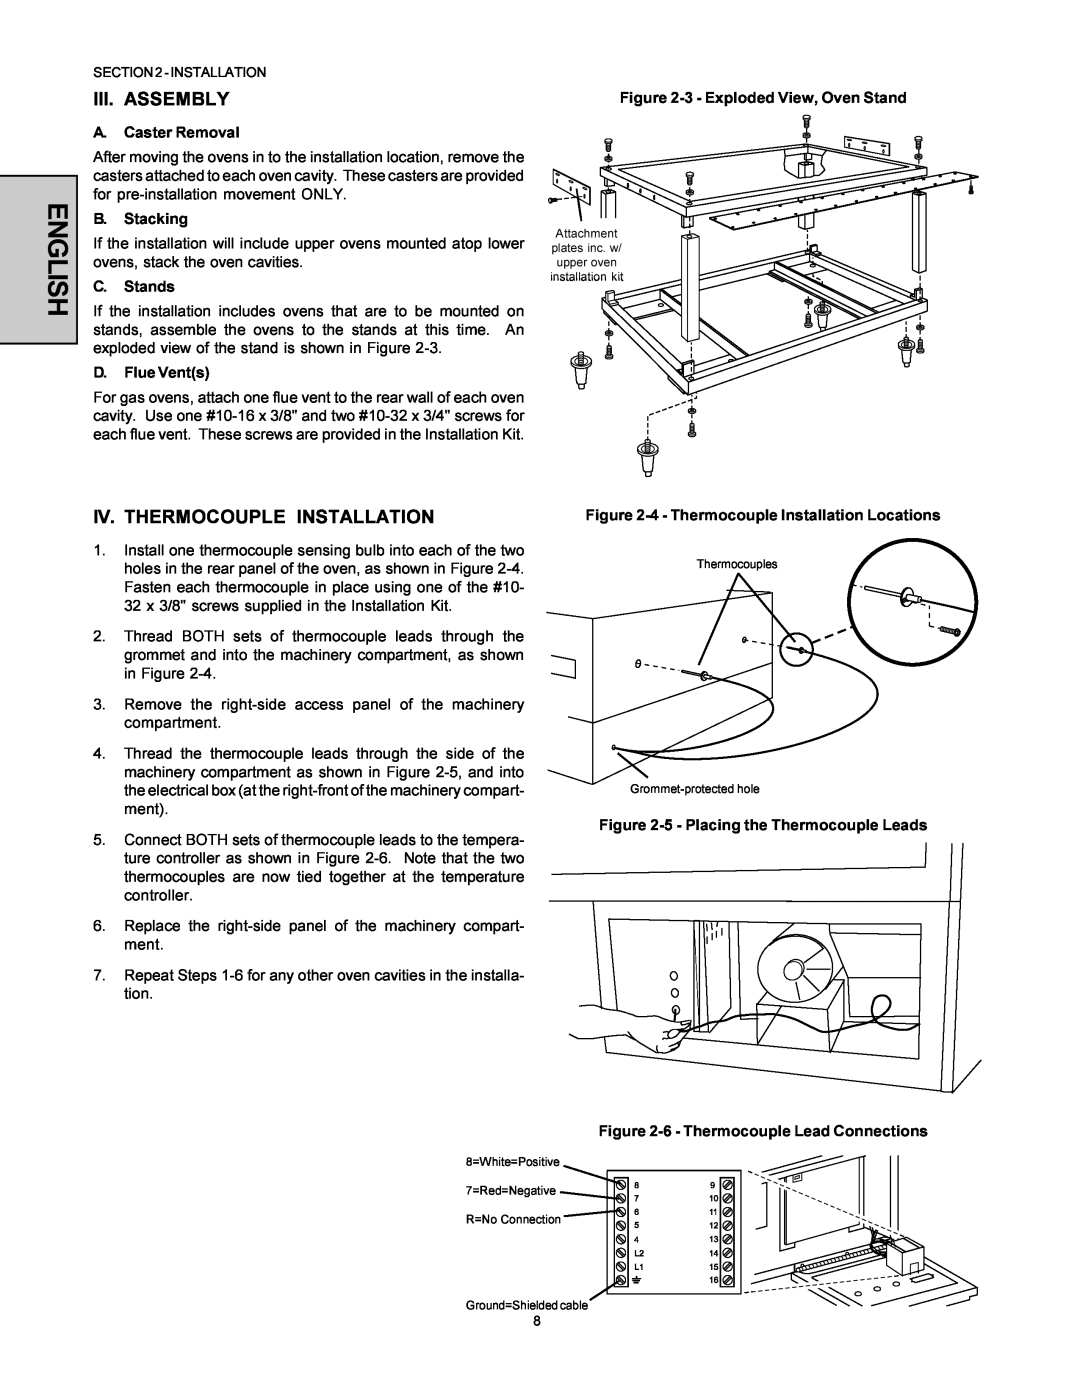 Middleby Marshall PS360-U English, Iii. Assembly, Iv. Thermocouple Installation, A.Caster Removal, B.Stacking, C.Stands 